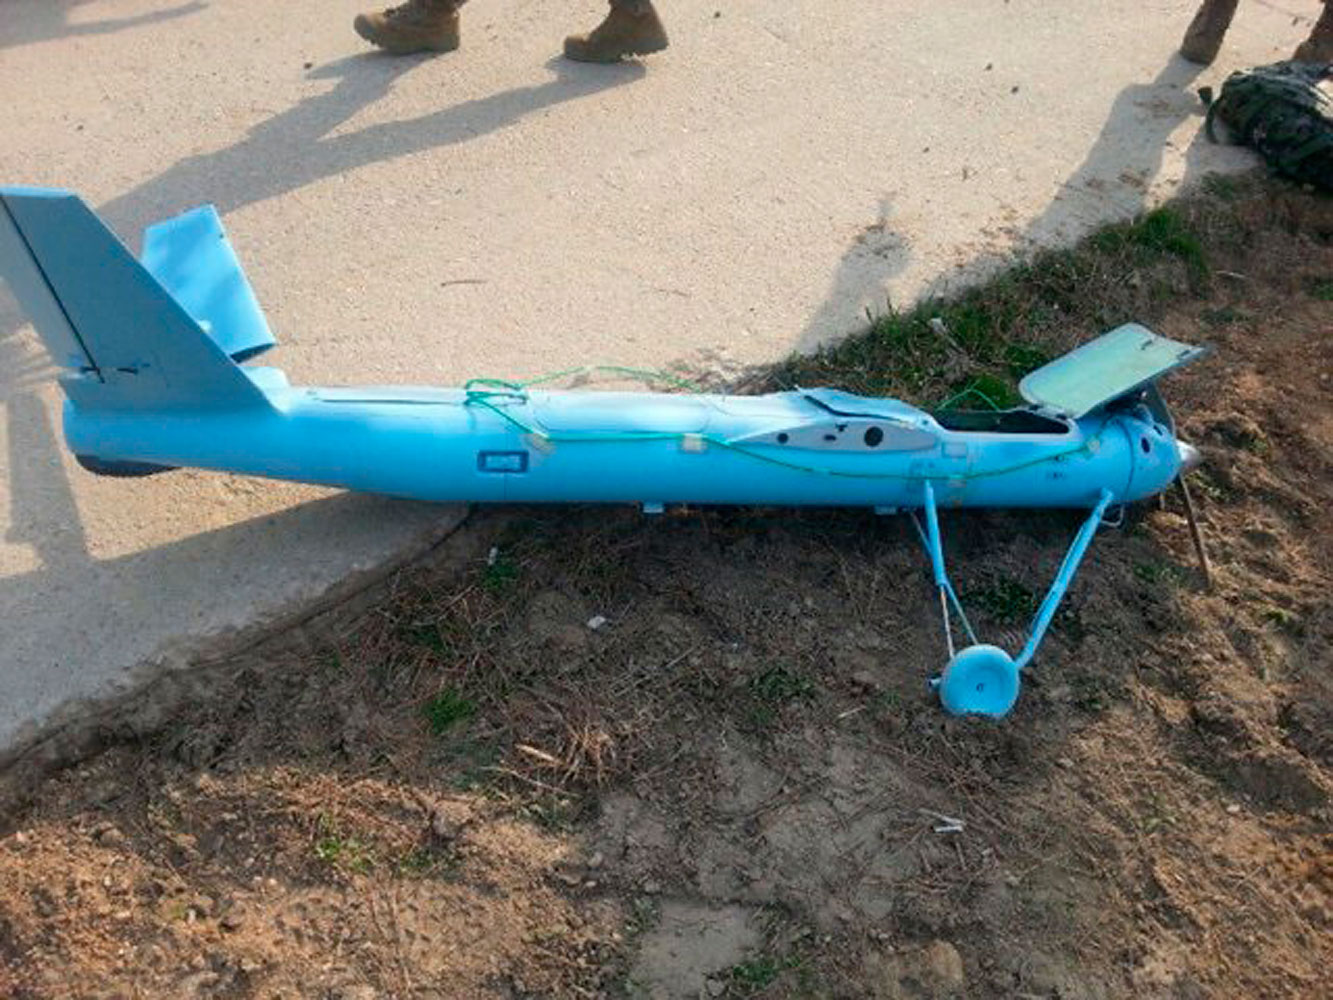 A crashed unmanned drone is seen on Baengnyeongdo, an South Korean island near the border with North Korea in a picture released by Yohnap on April 1, 2014.